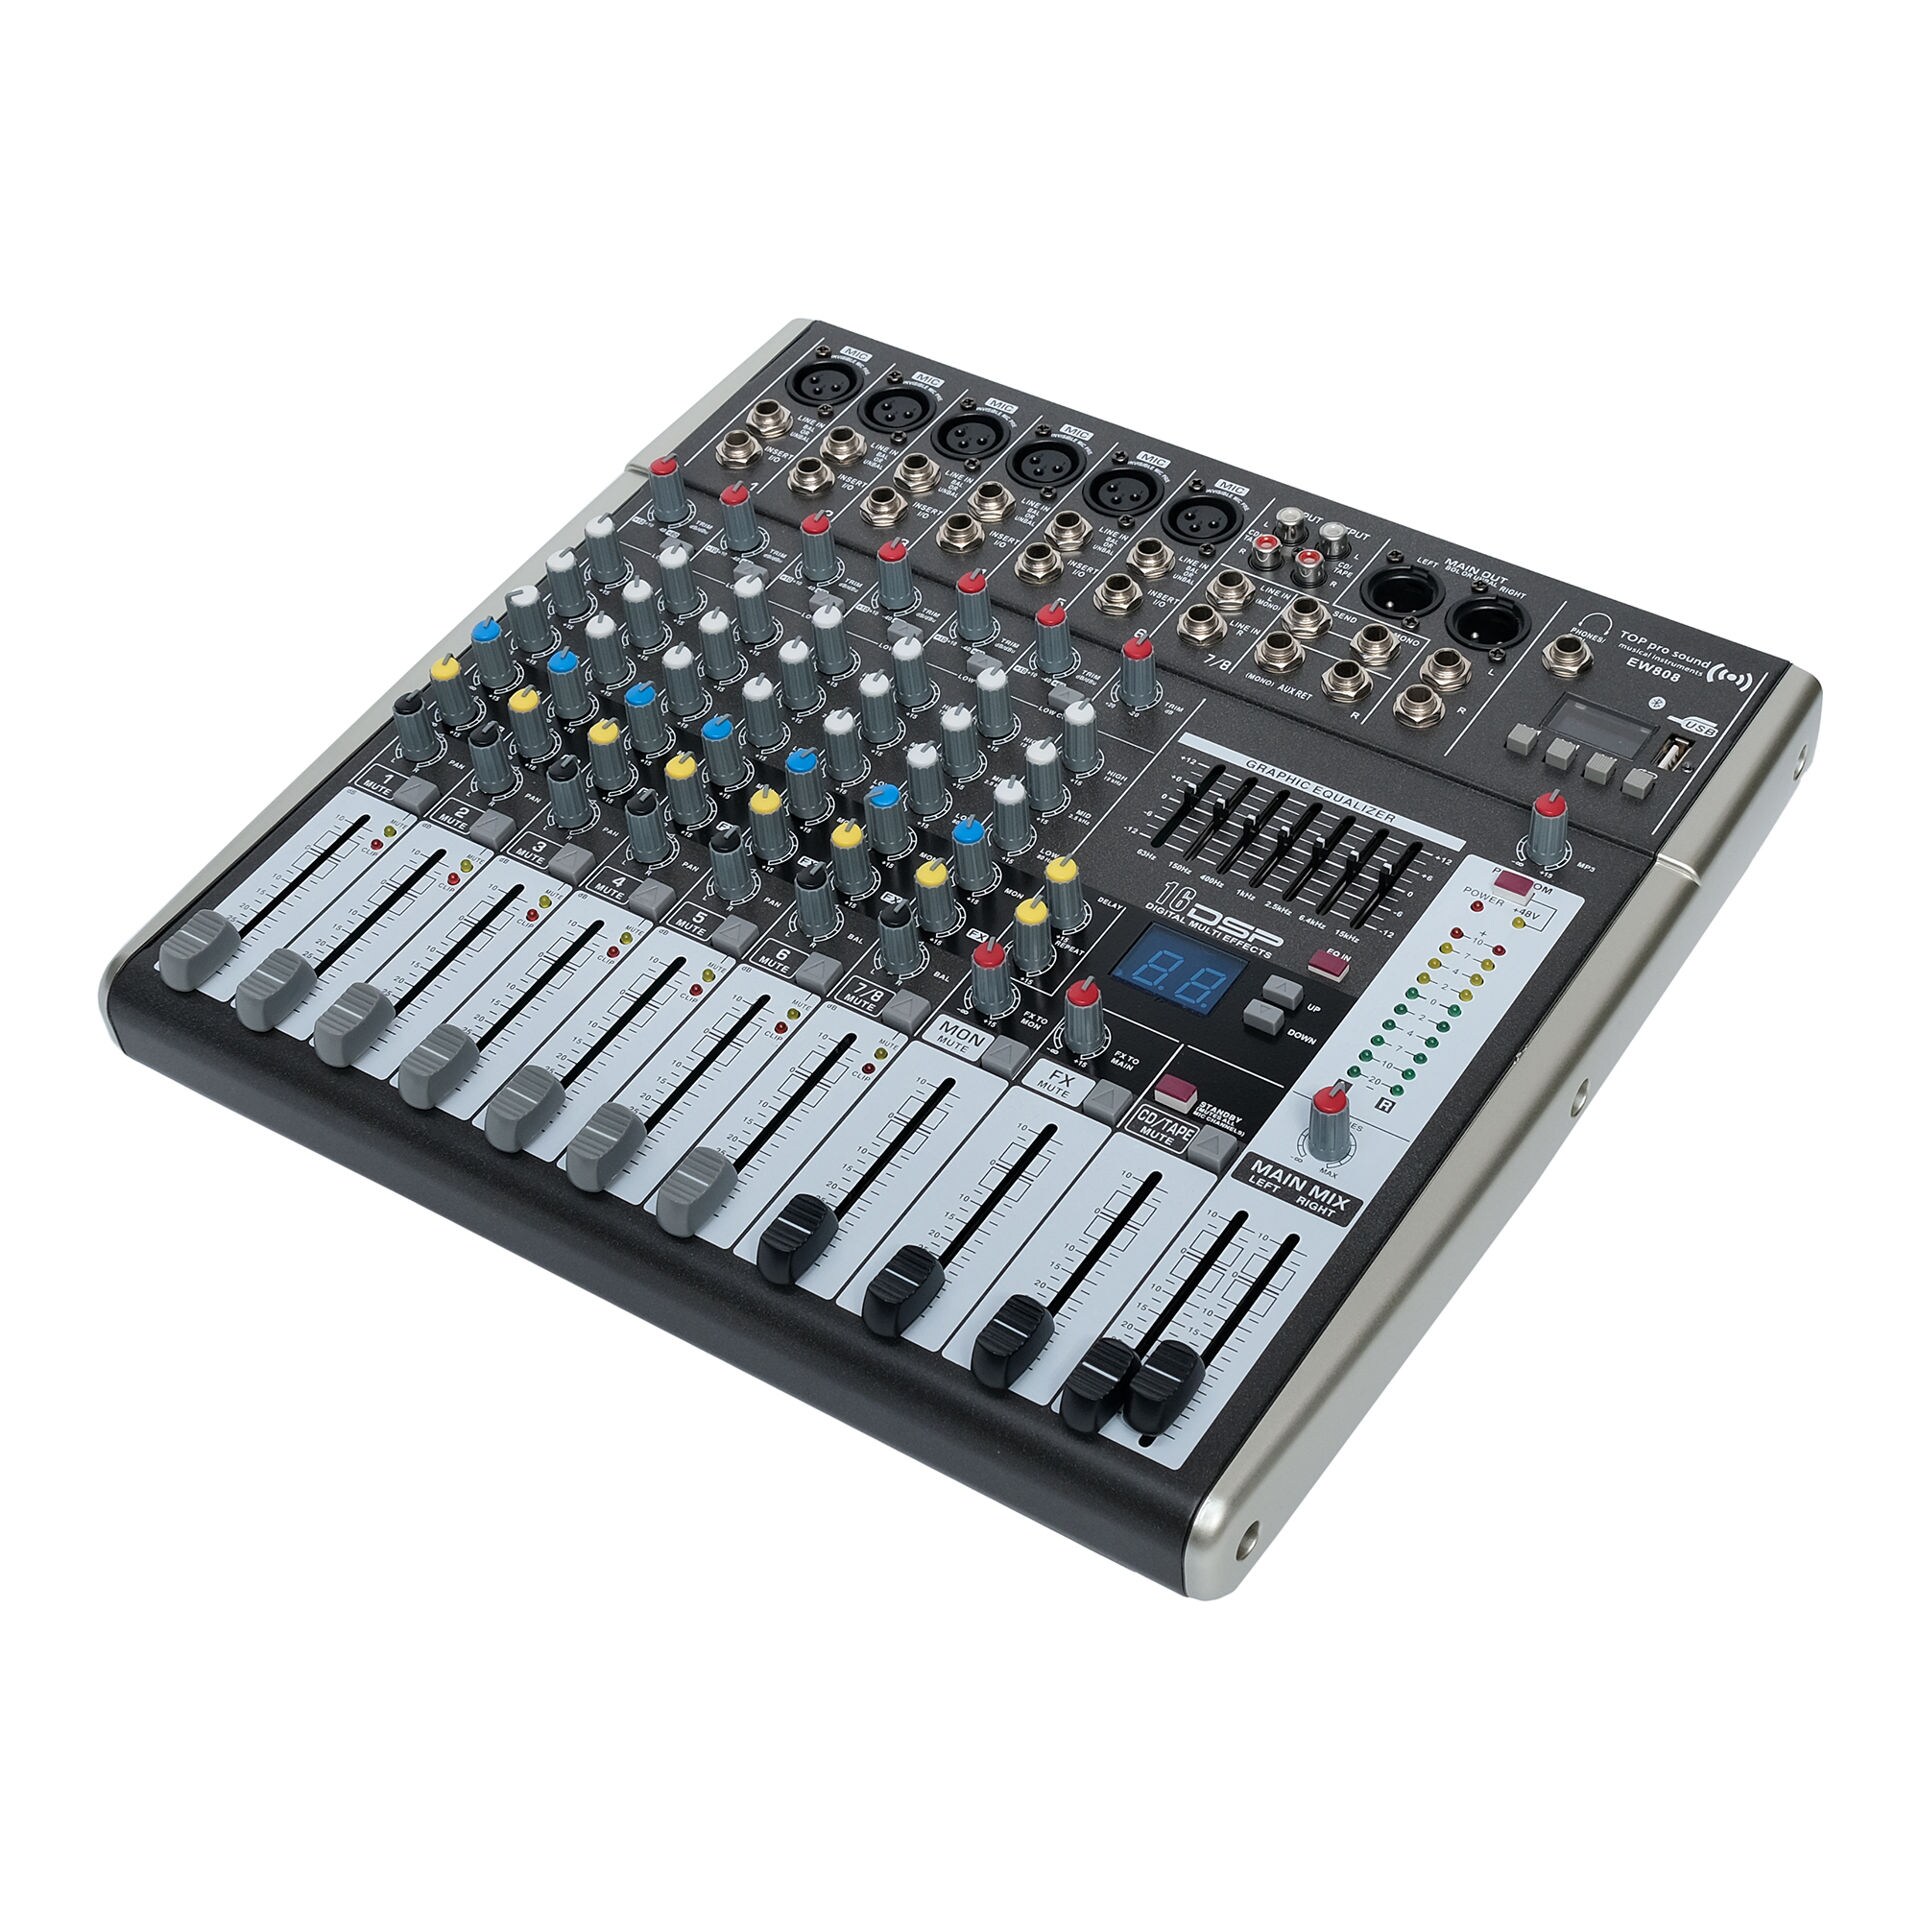 https://assets.dragonmart.ae/pictures/0674849_top-pro-dsp-echo-professional-mixer-with-8-channel-ew808-multicolor.jpeg